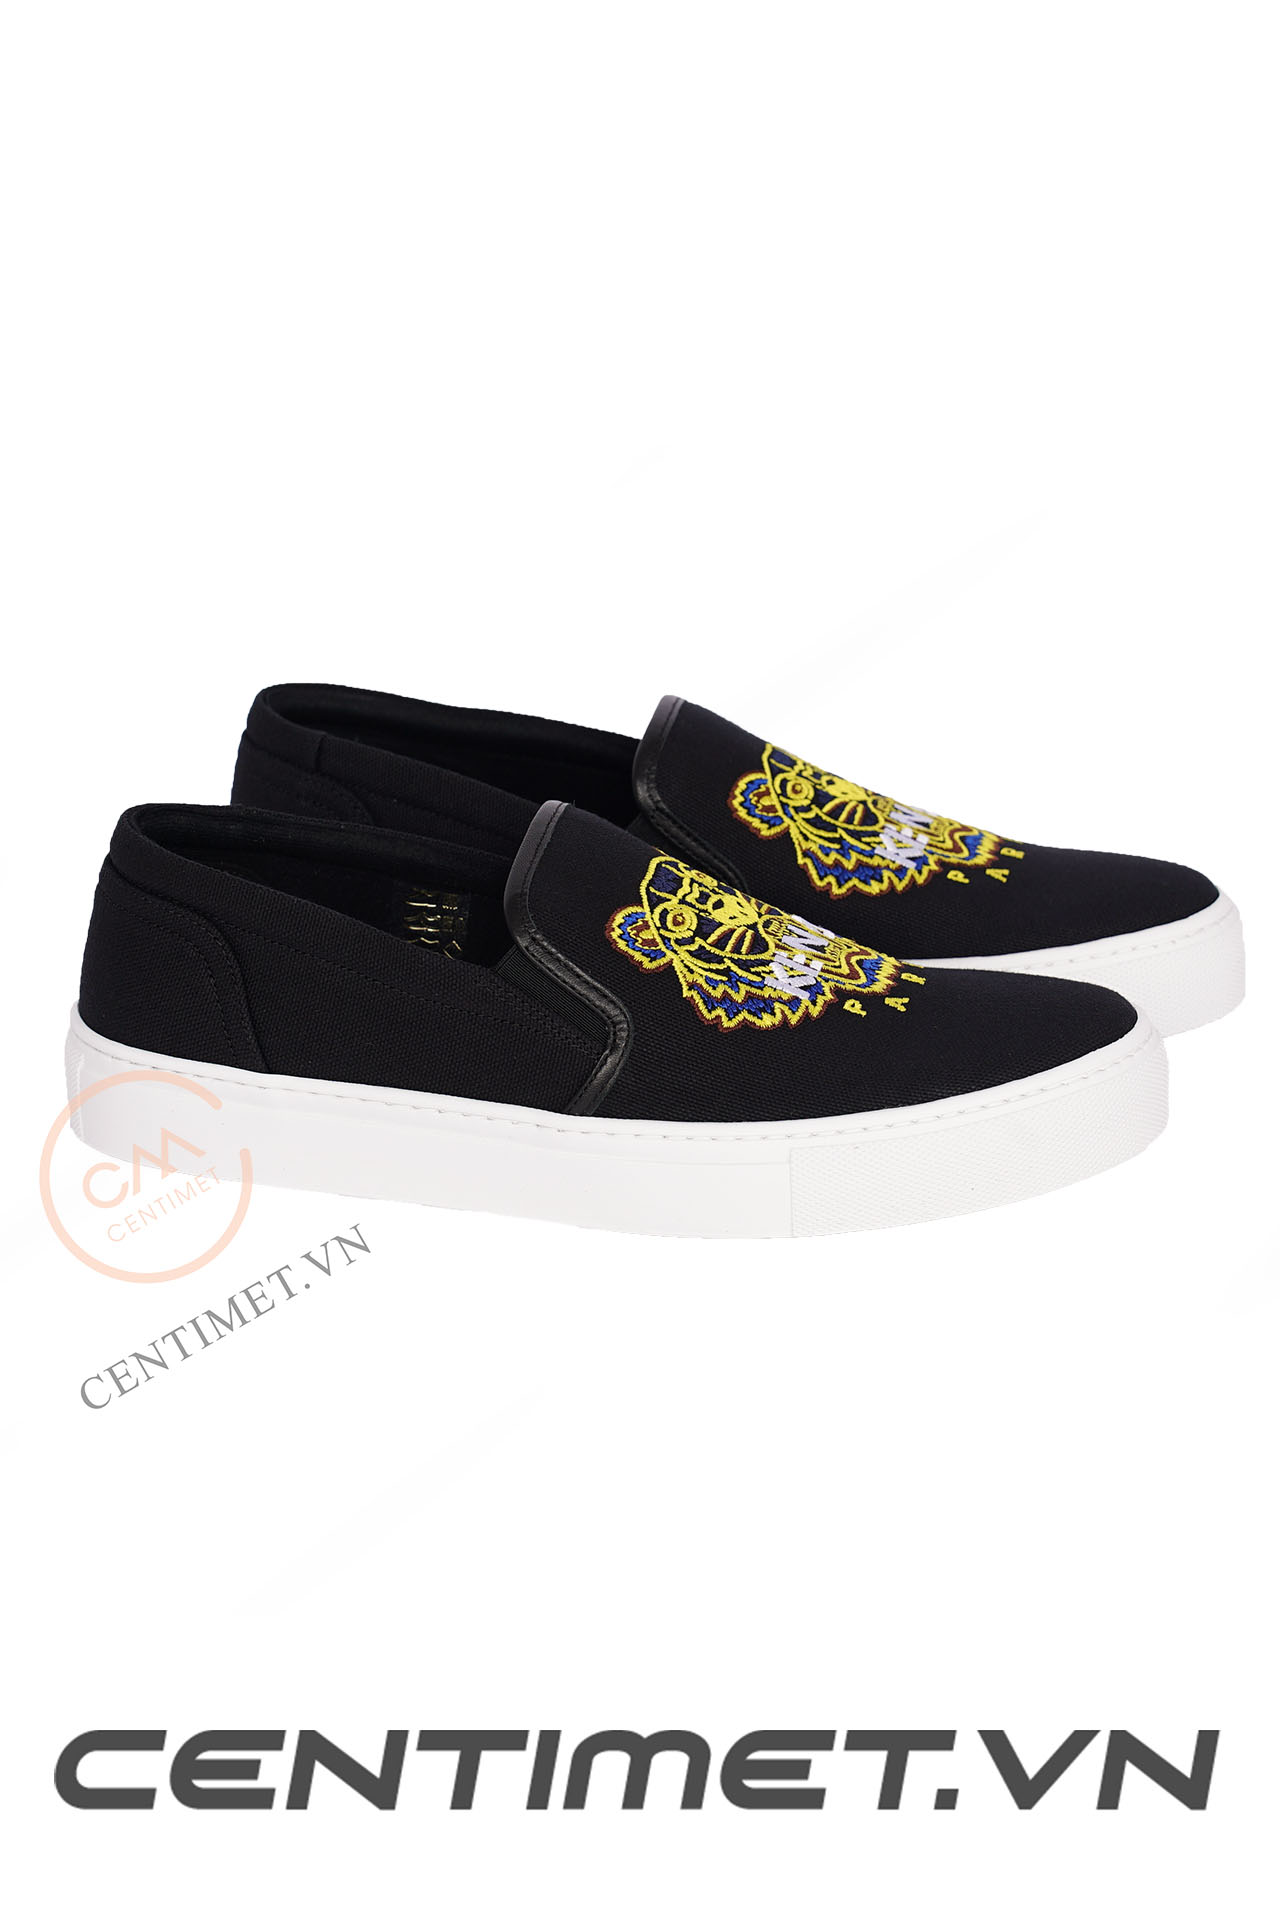 KENZO Tiger Embroidered Slip-On Sneakers